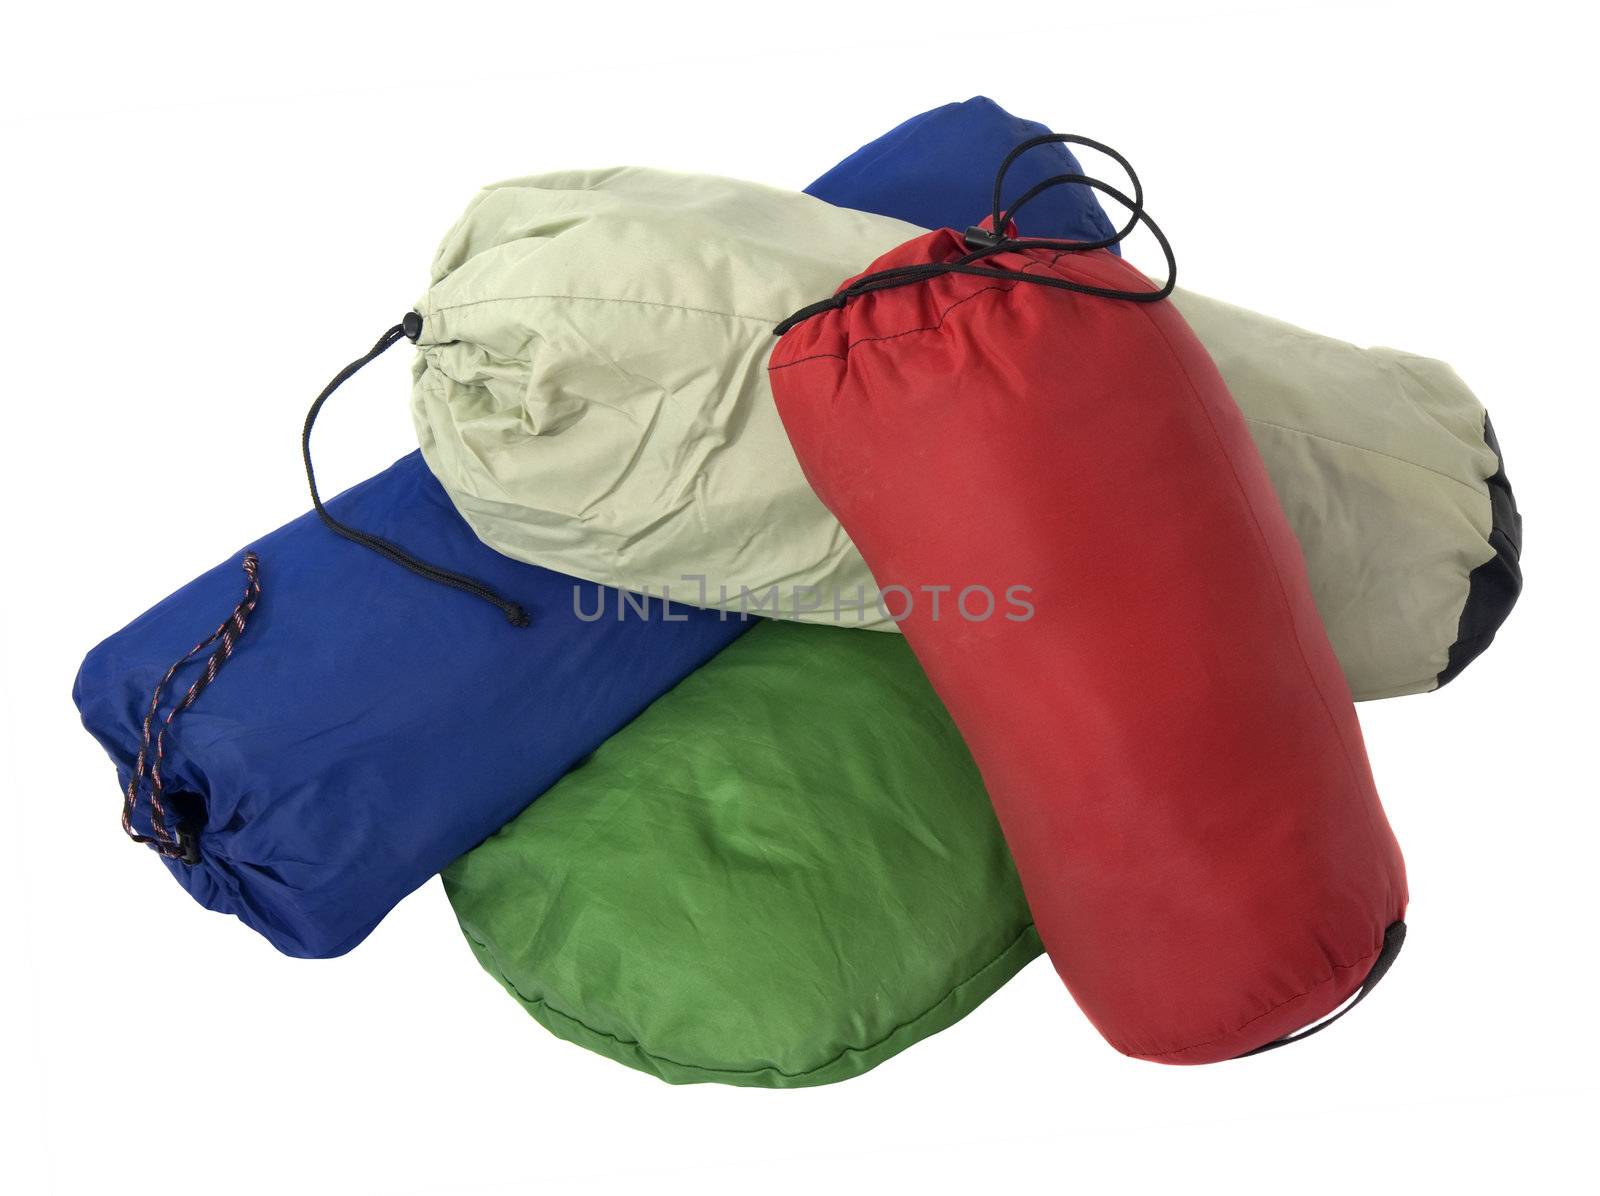 a pile of colorful bags with camping equipment (tent, sleeping bag, pad) isolated on white